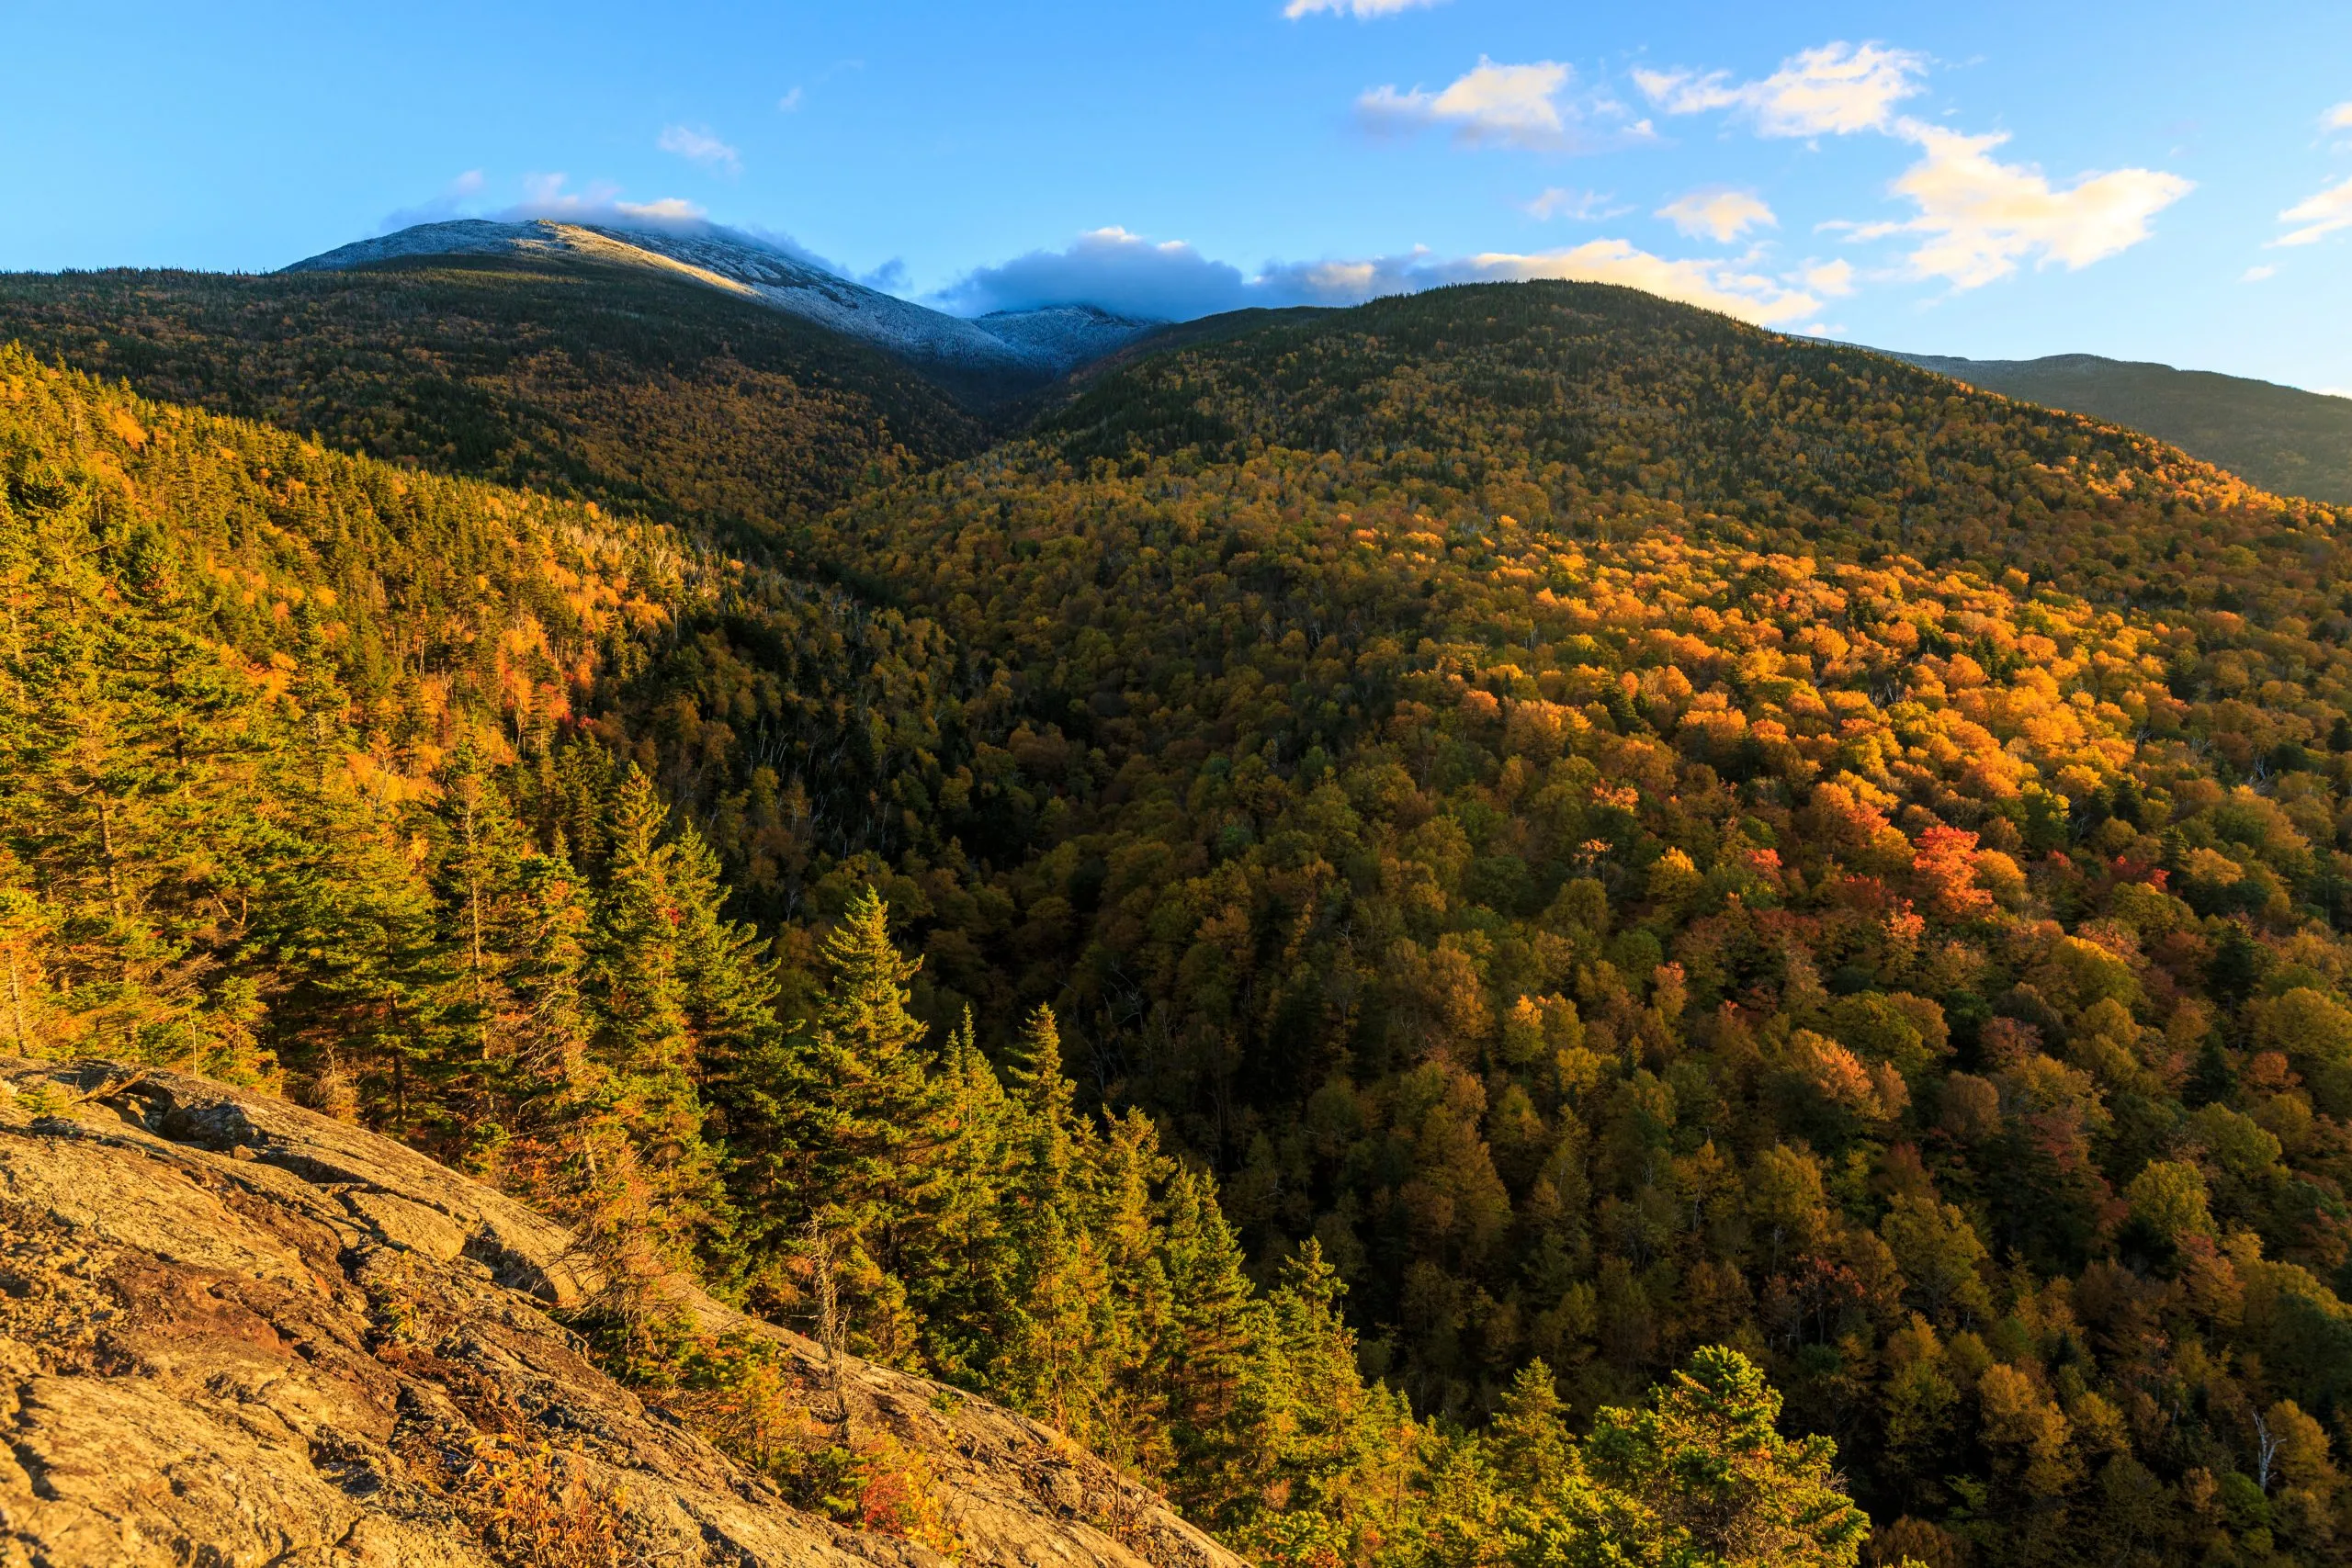 Fall foliage on Mount Madison in New Hampshire's White Mountain National Forest. View from Dome Rock.